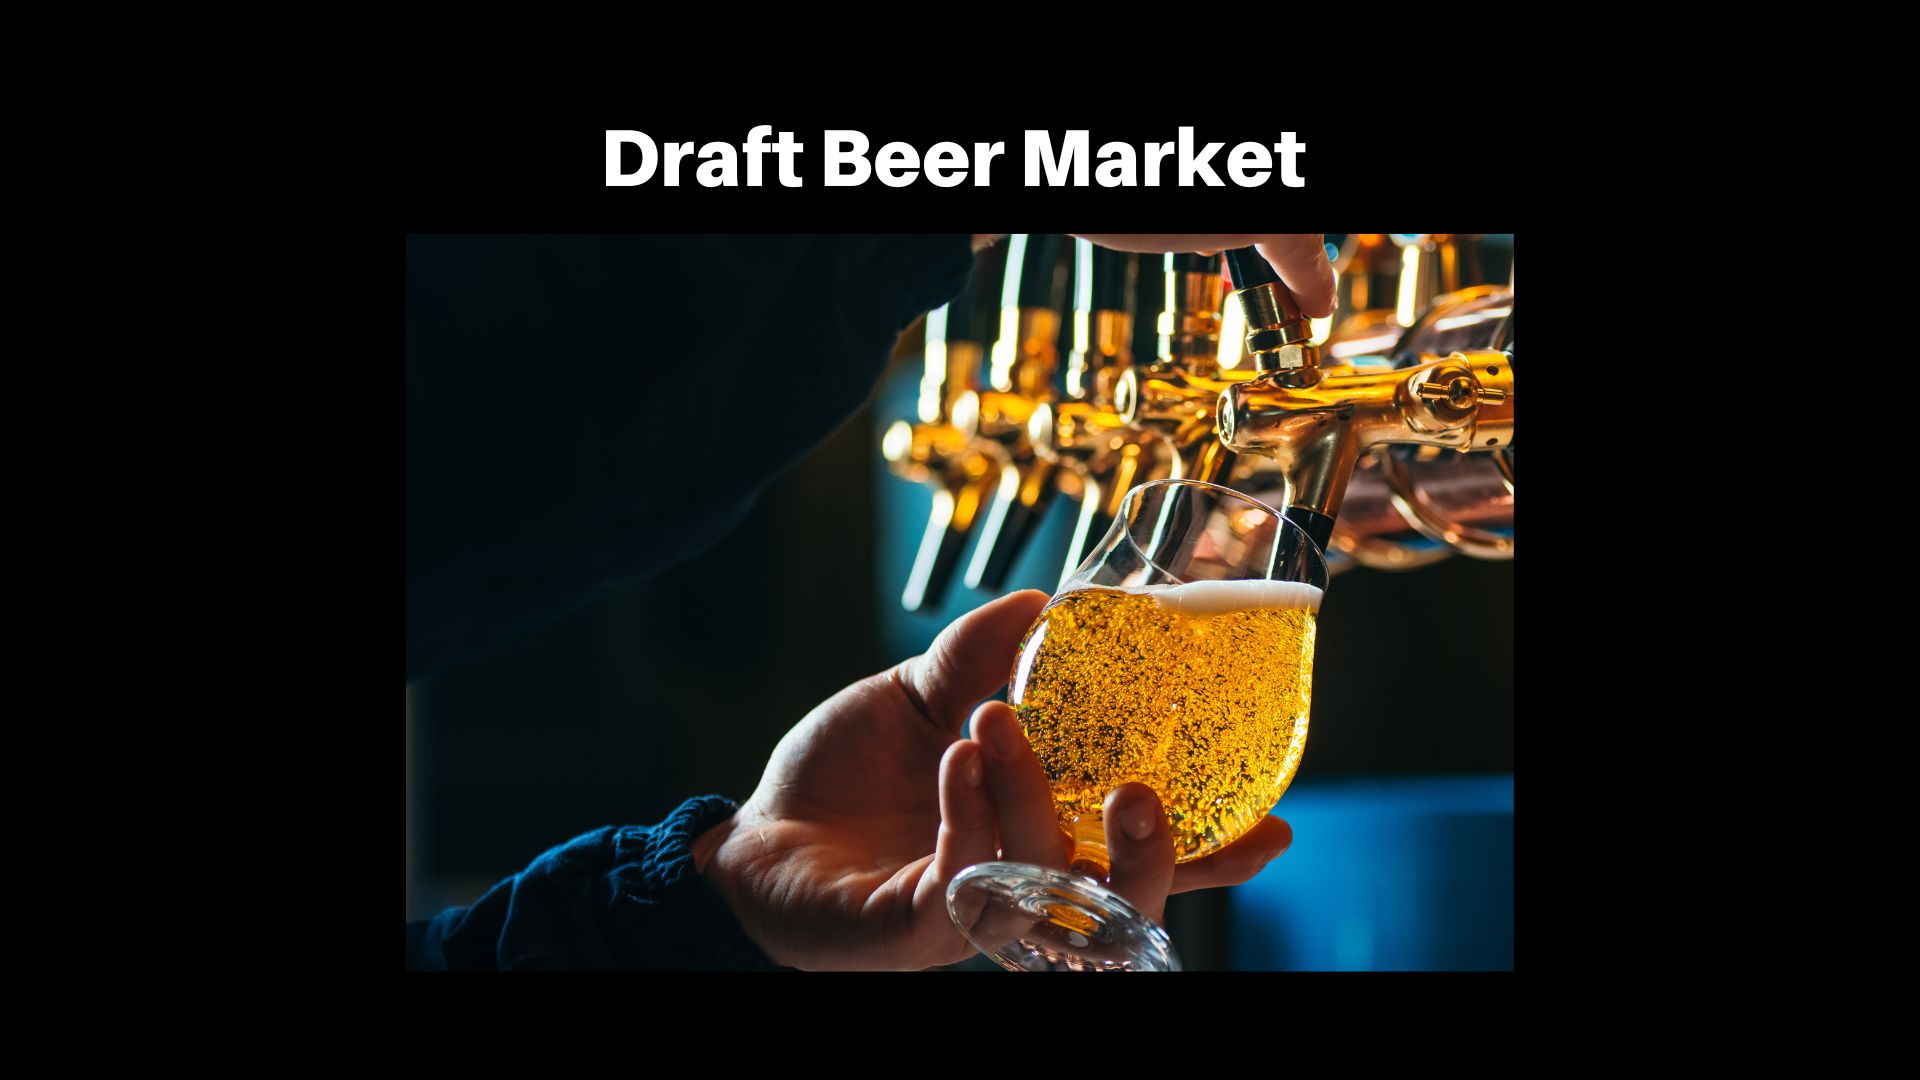 Draft Beer Market is Estimated to Showcase Significant Growth of USD 90.1 Bn in 2032 With a CAGR 4.2%